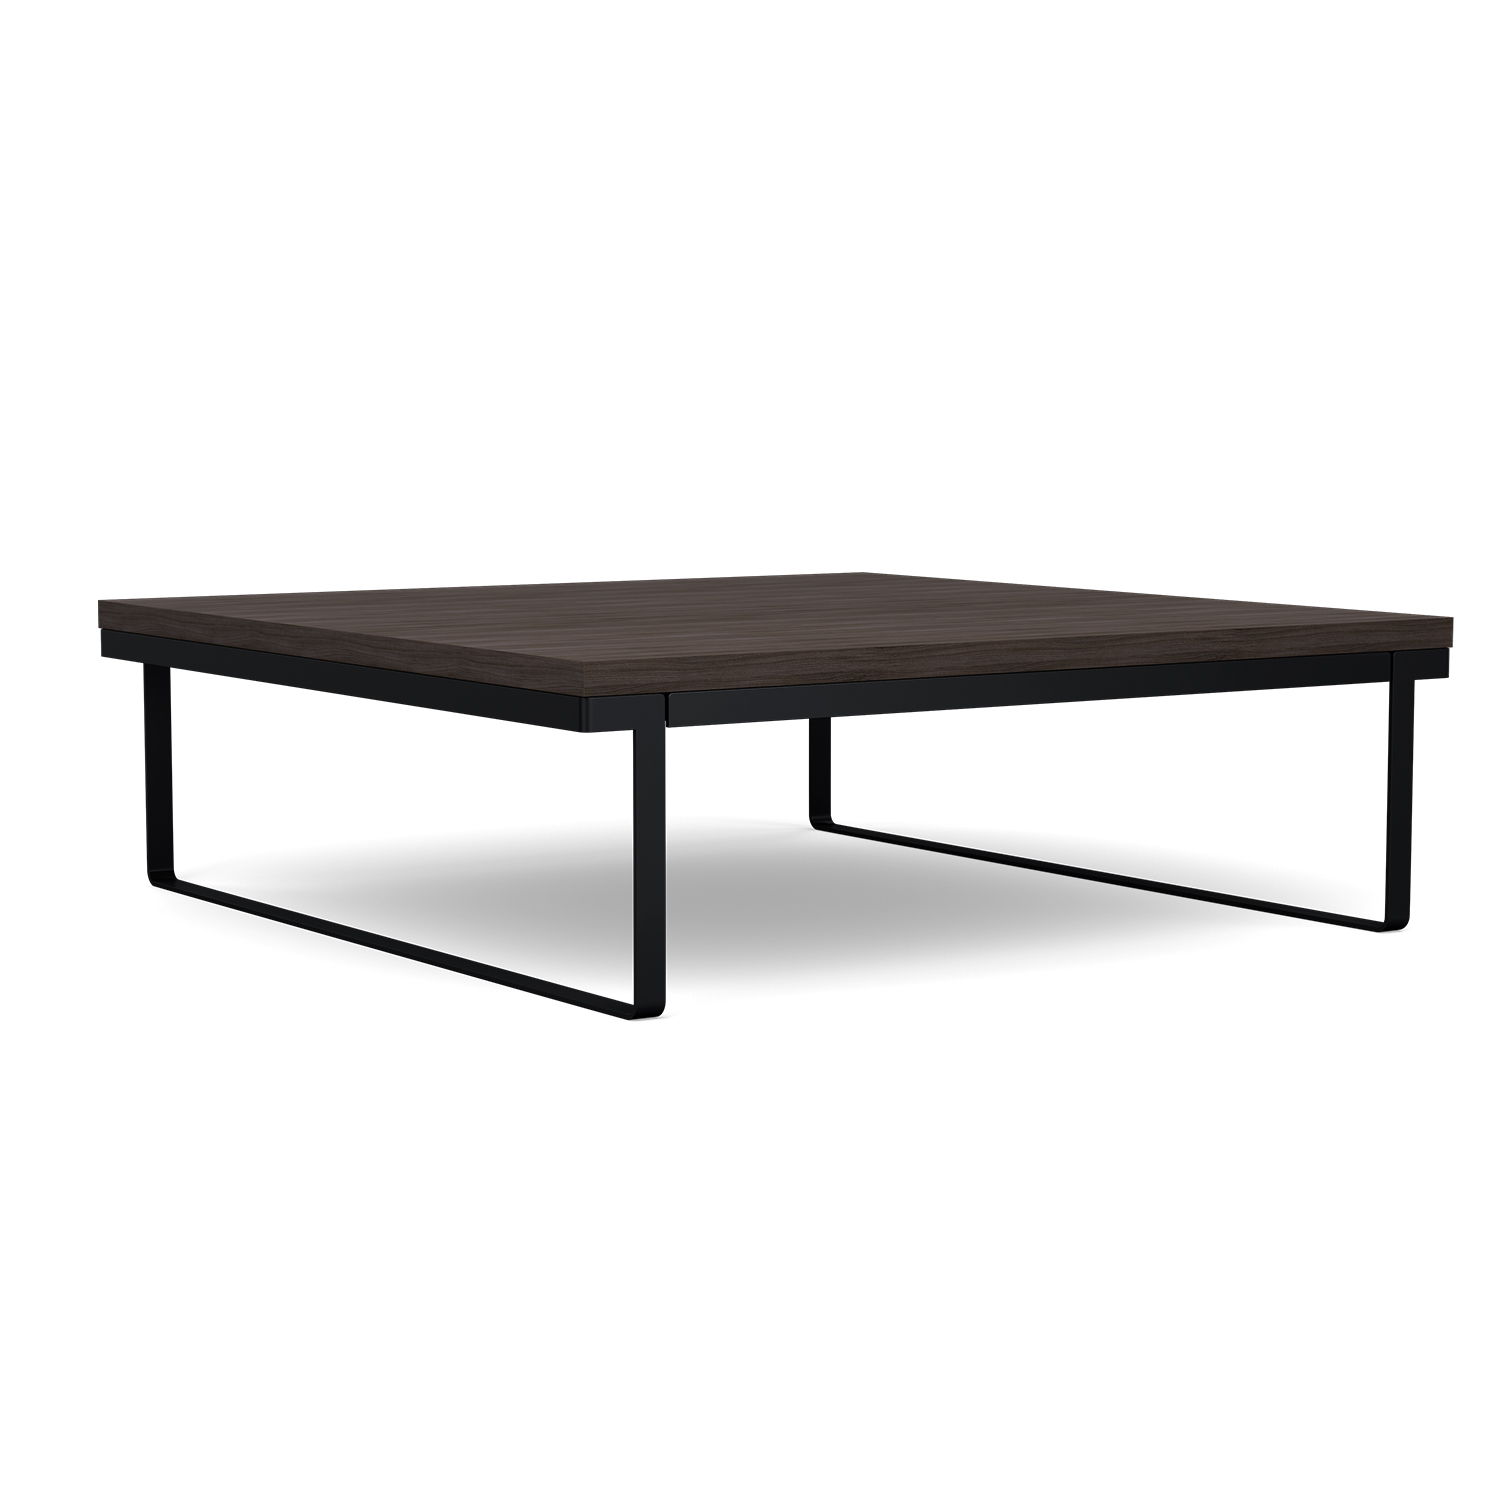 SitOnIt Cameo Table